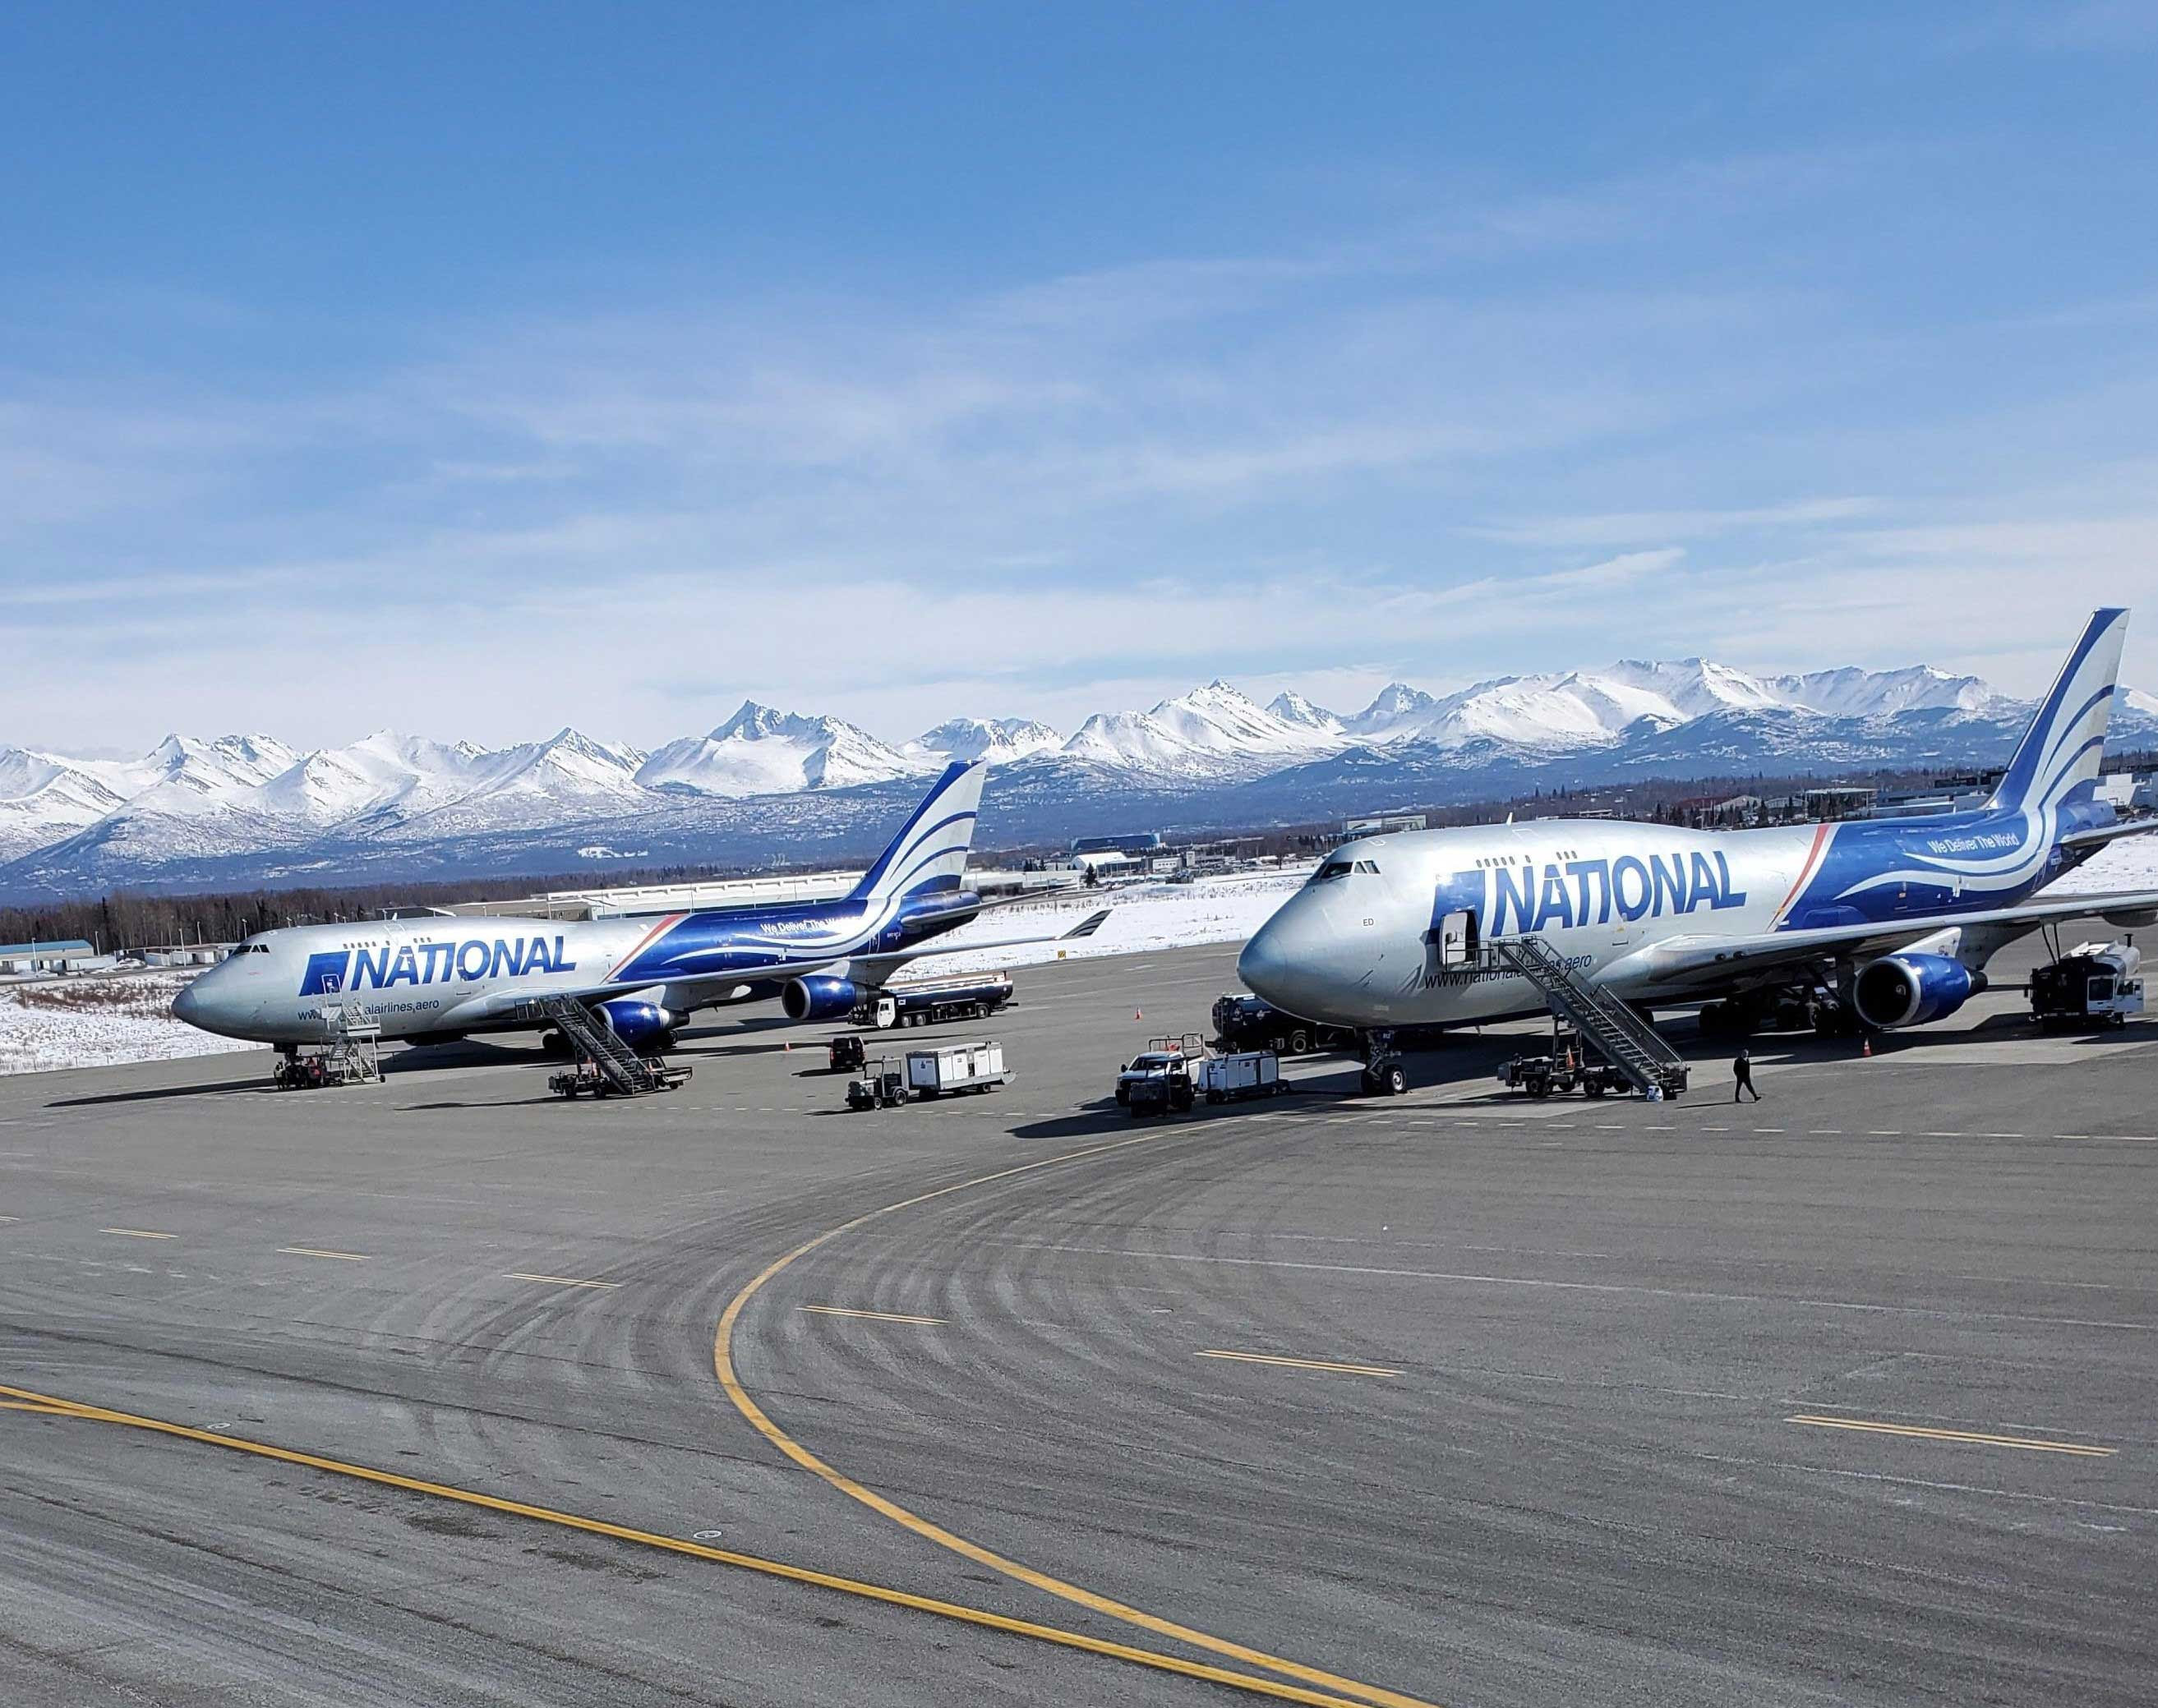 National Air Cargo flights make a technical stop at Ted Stevens Anchorage International Airport in Alaska flying from Shanghai to Port-au-Prince